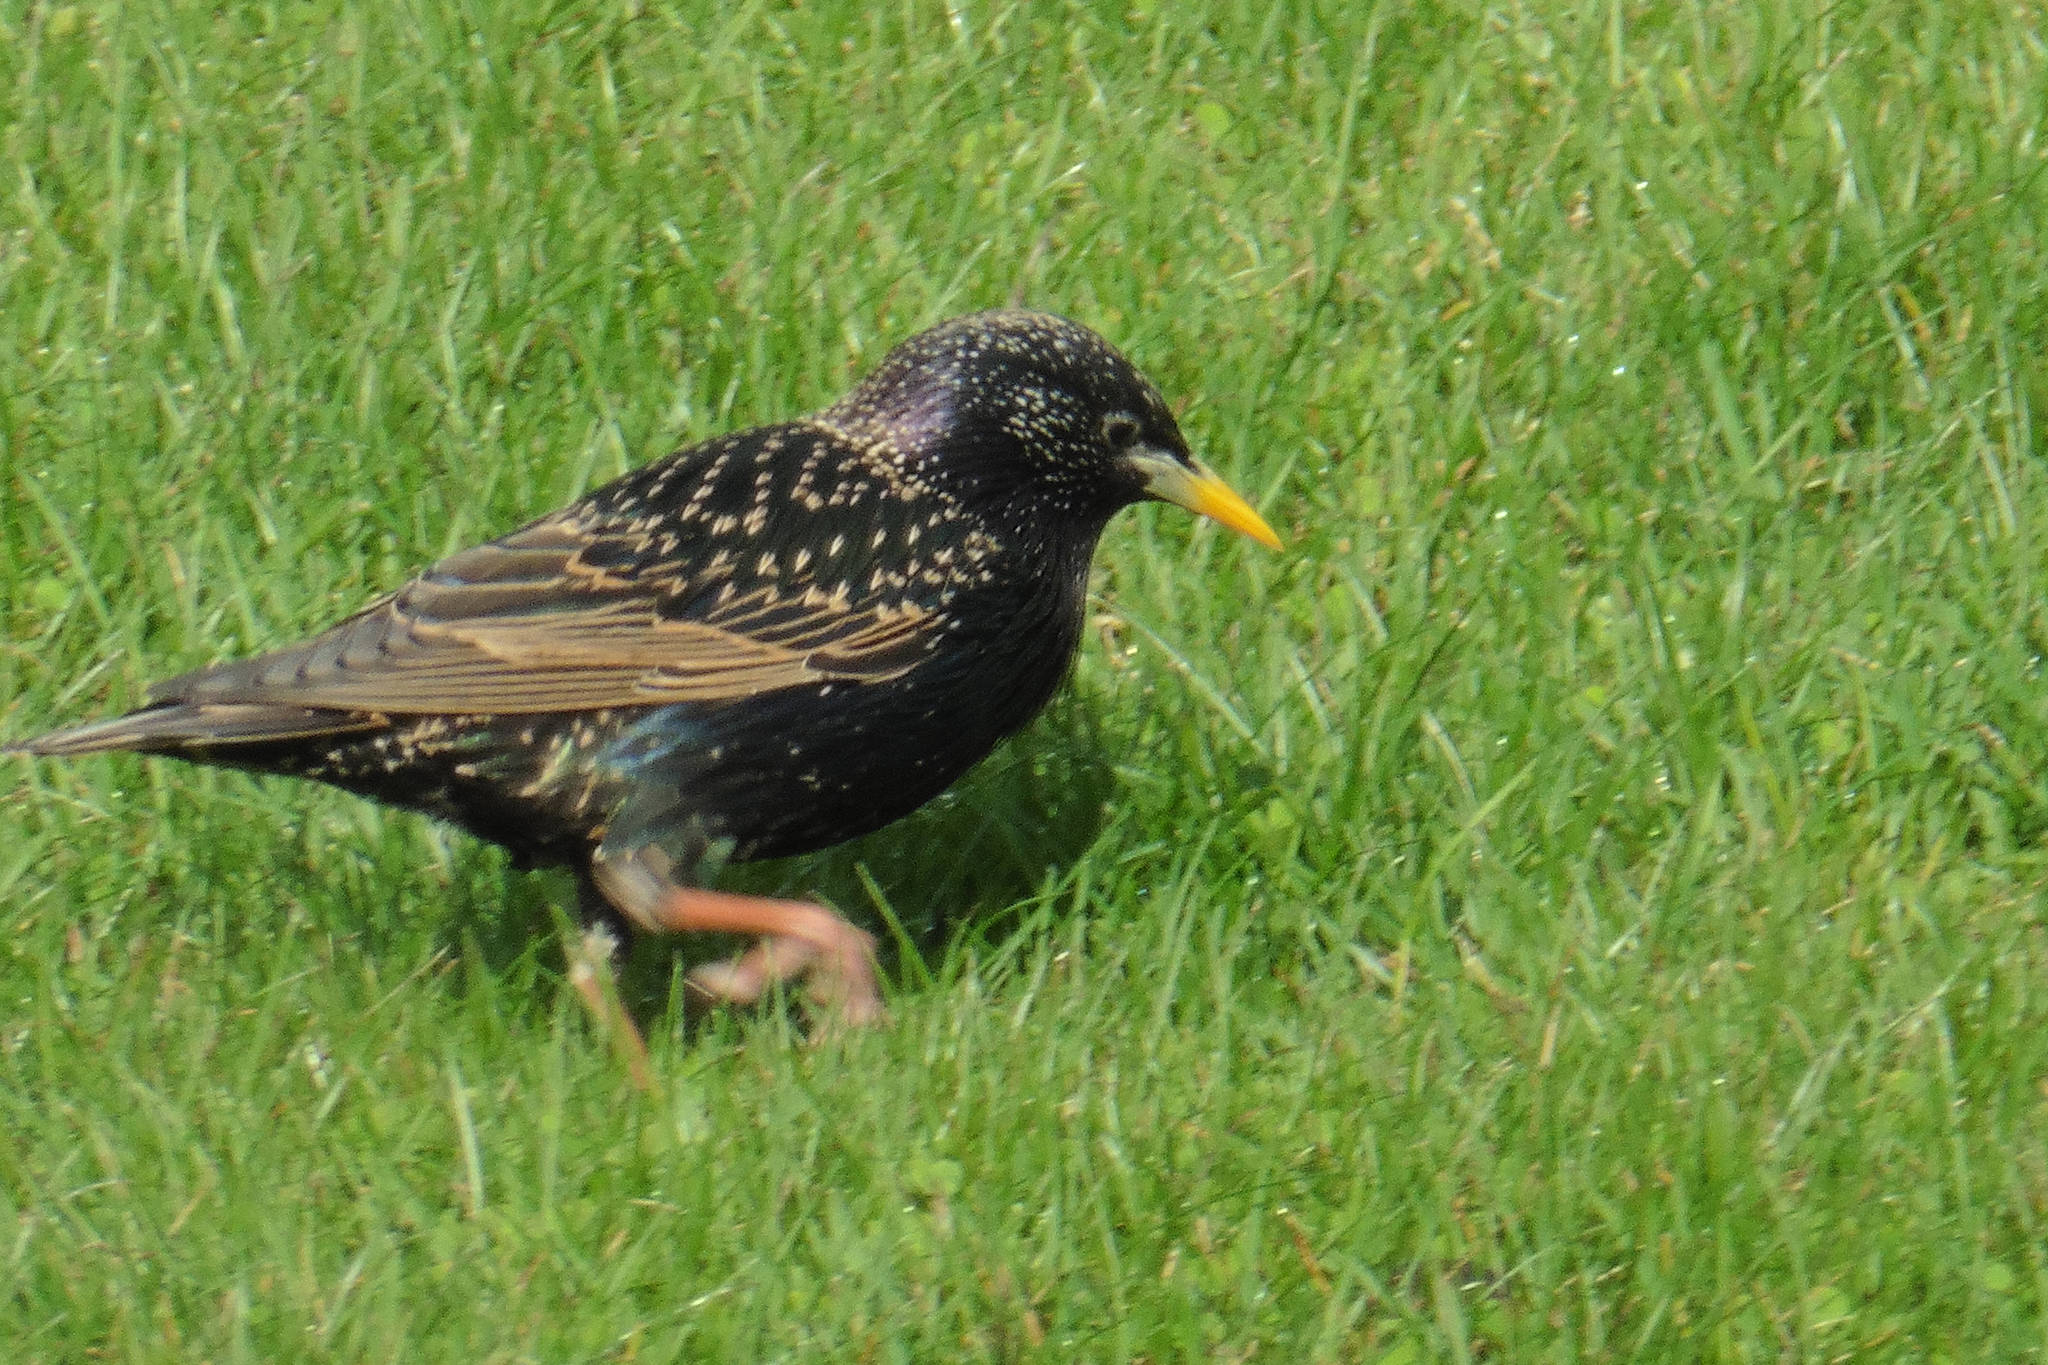 An invasive starling walks Mendenhall riverbank, May 7, 2020. “Mated pairs have been showing up for the last two weeks gathering nesting material,” writes David Athearn. “There goes the neighborhood.” (Courtesy Photo | David Athearn) David Athearn